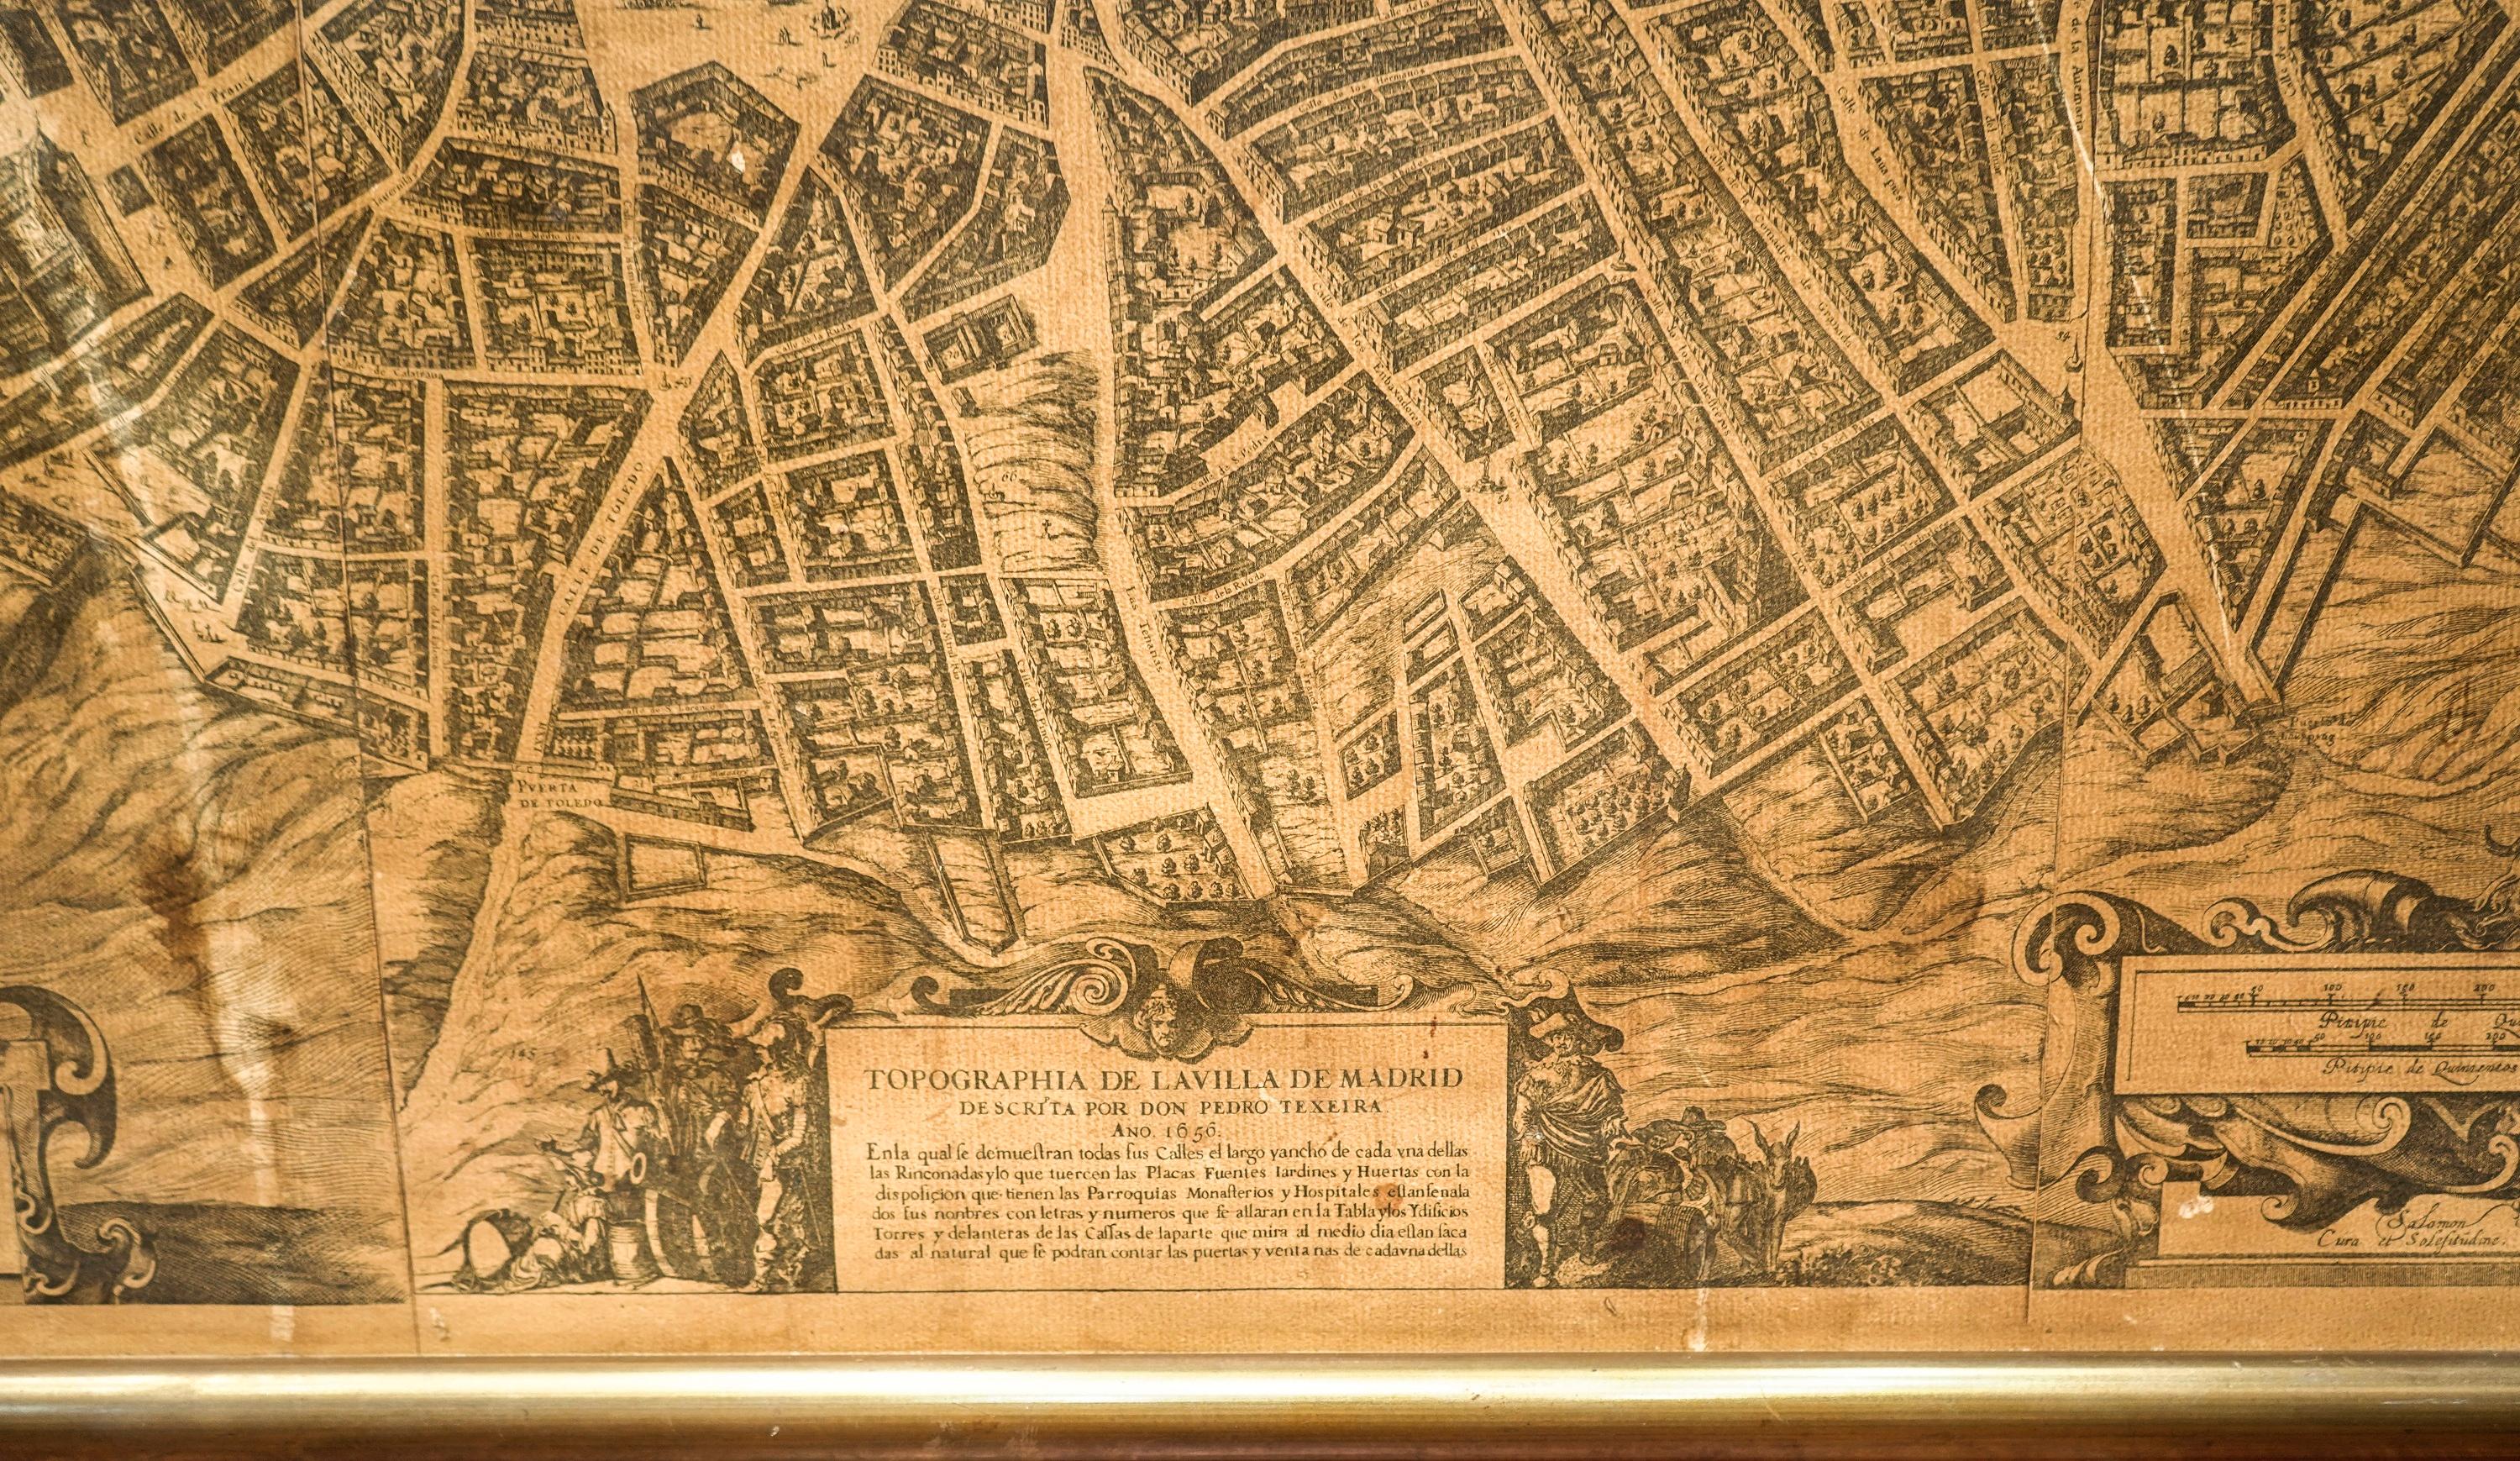 1950 Spanish Cartographic Copy of Pedro Texeira Map of Madrid of 17th Century 1